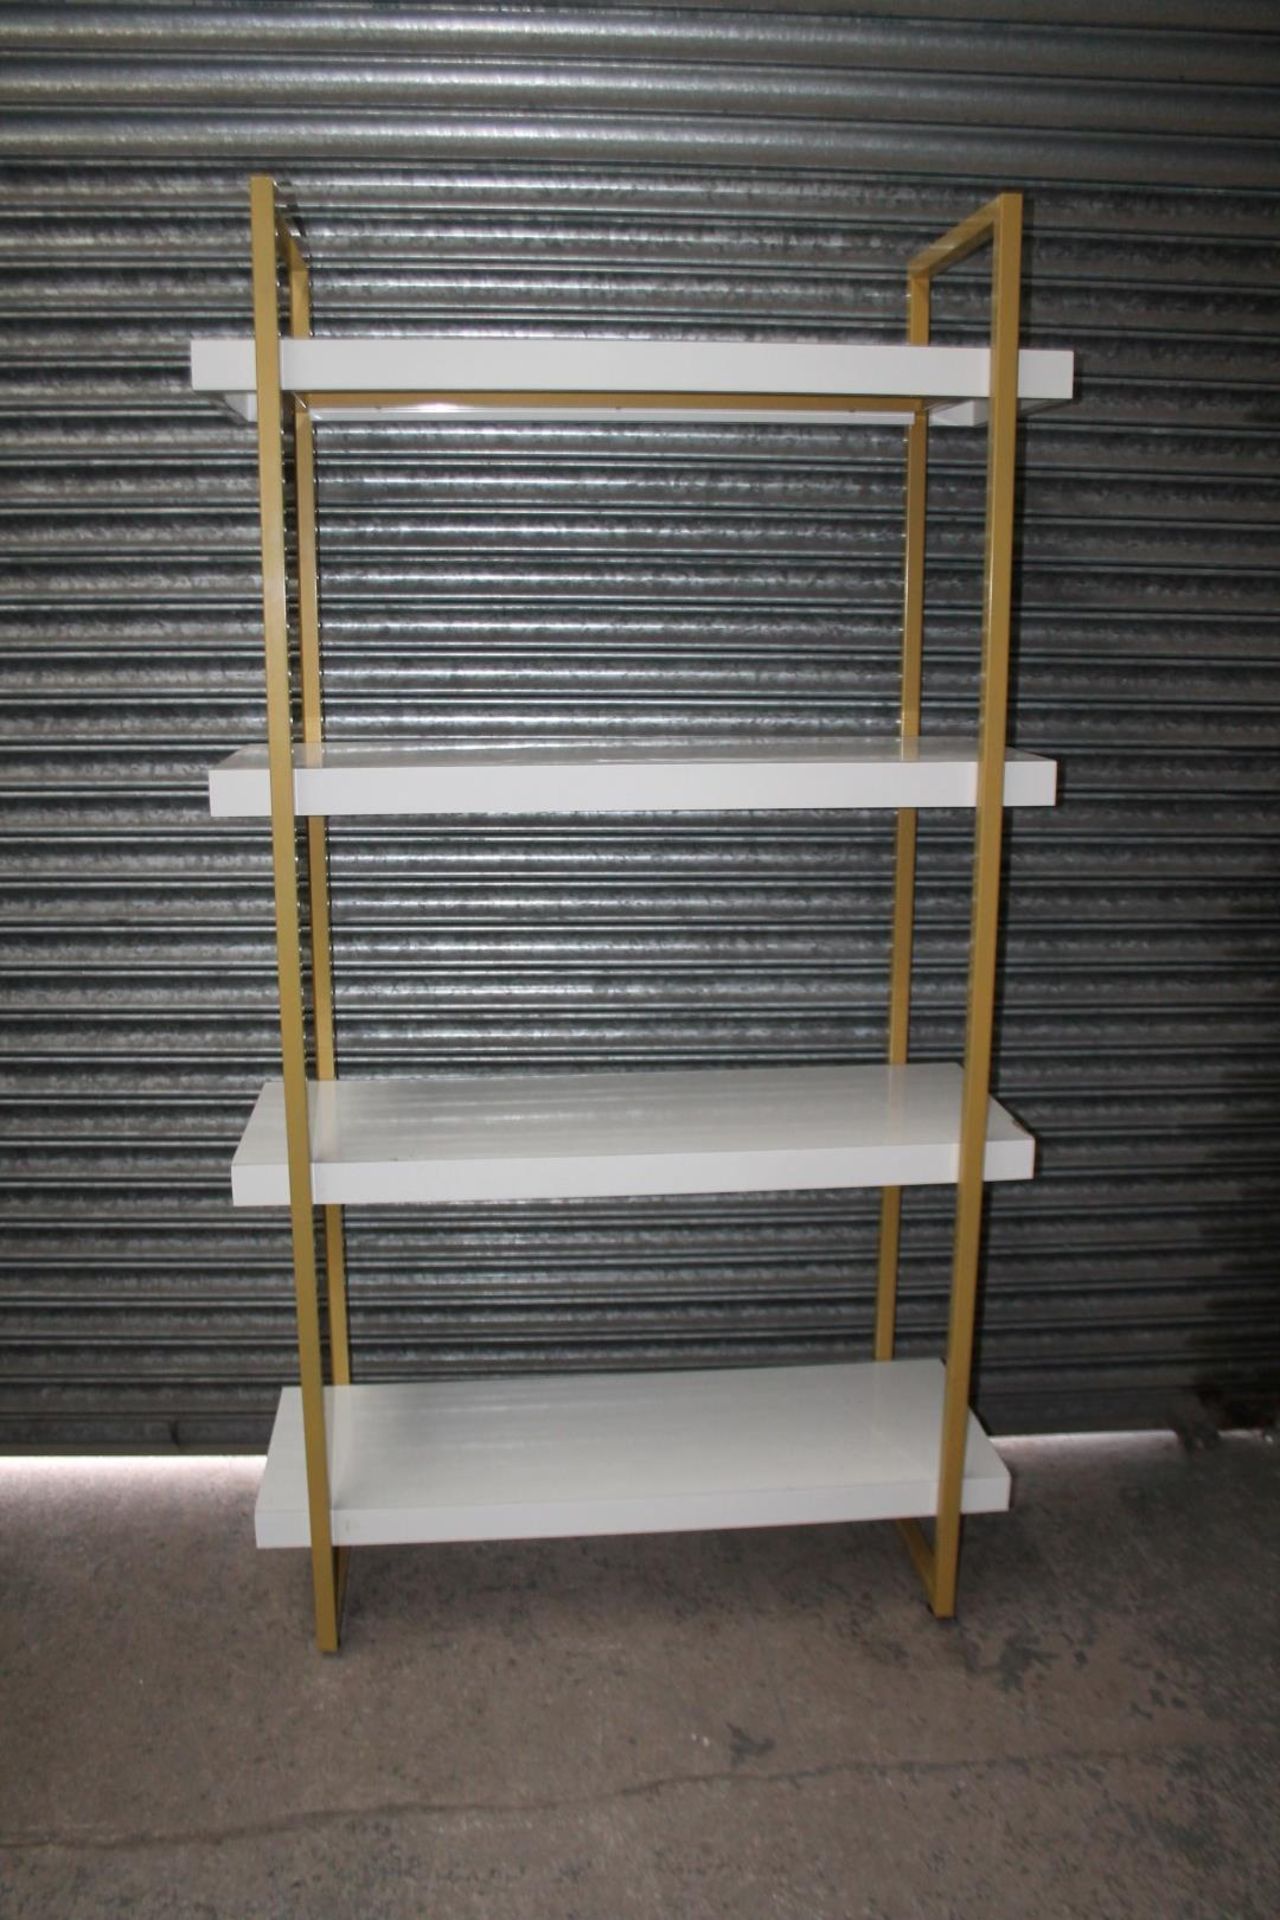 1 x Commercial 2-Metre Tall 4-Tier Shelving Unit In White And Bronze Finish - Ex-Display Showroom - Image 4 of 6